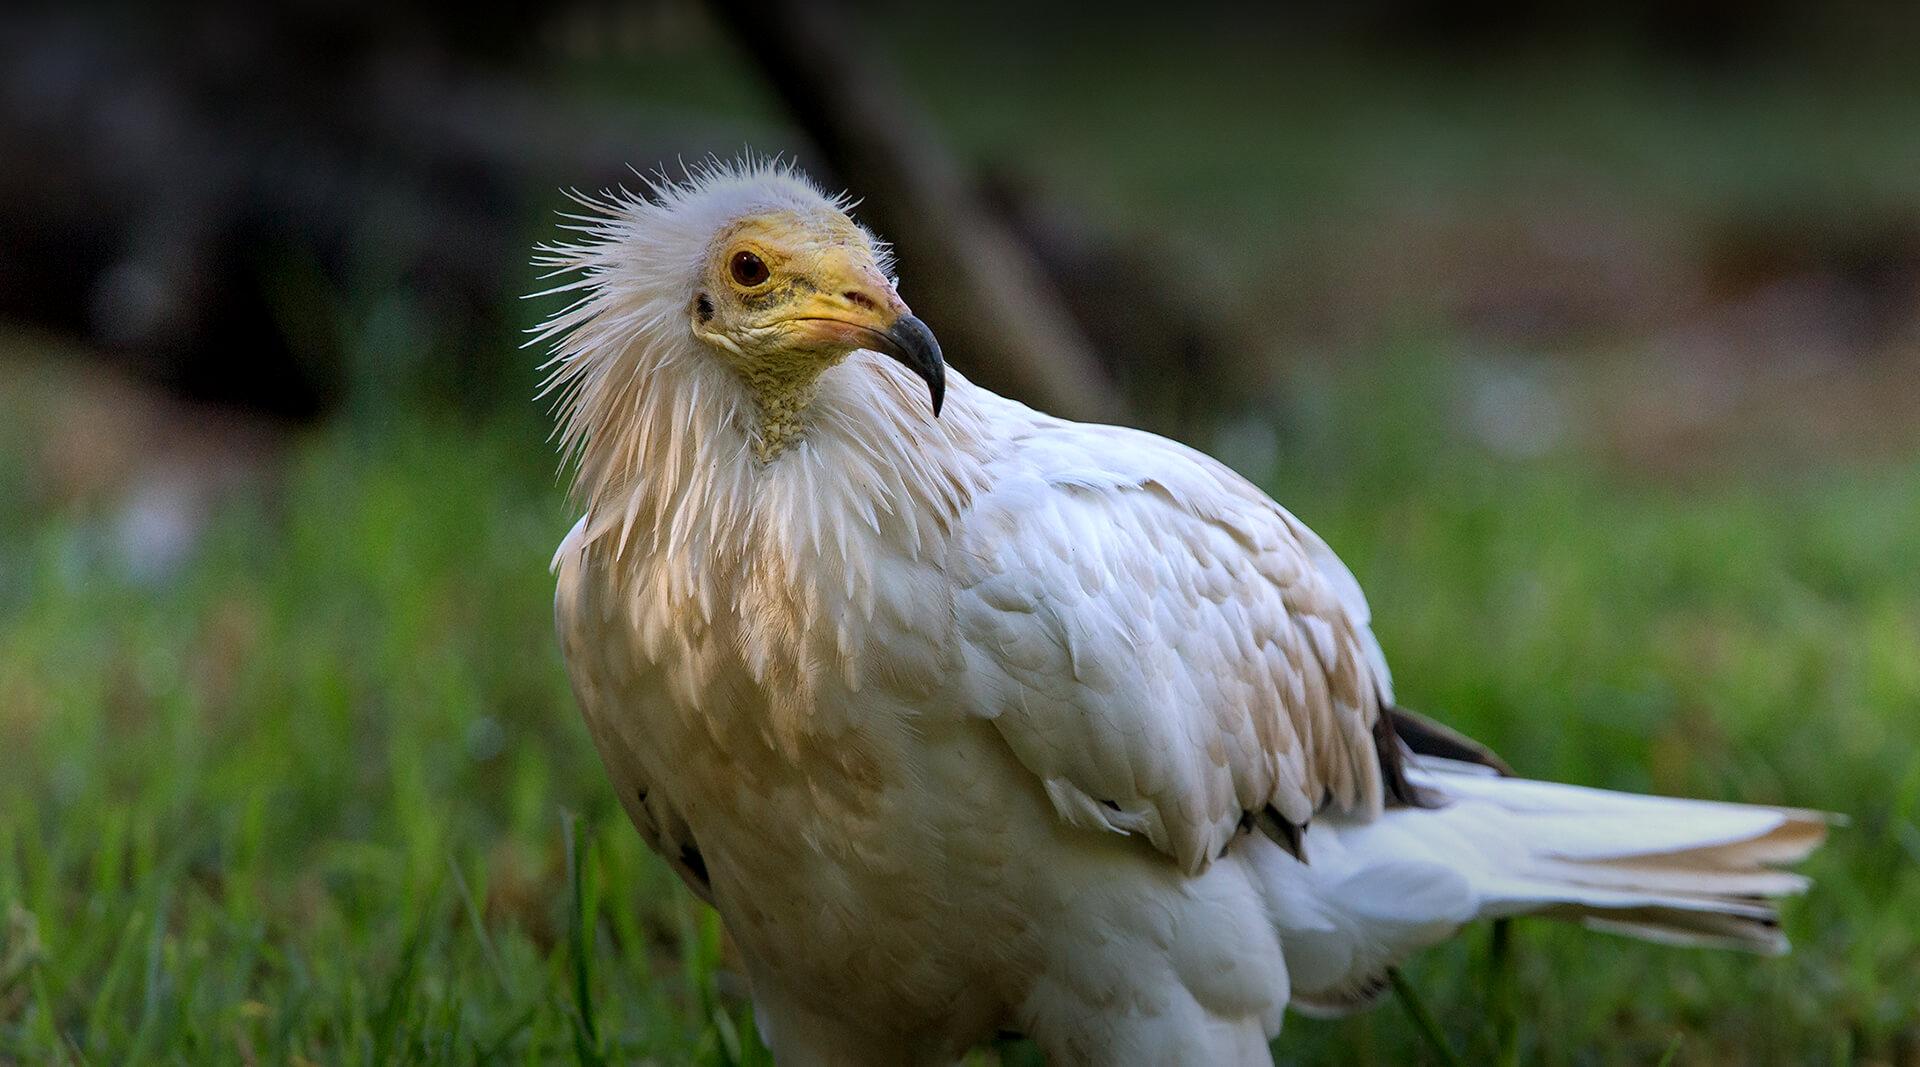 Egyptian vulture in grass.